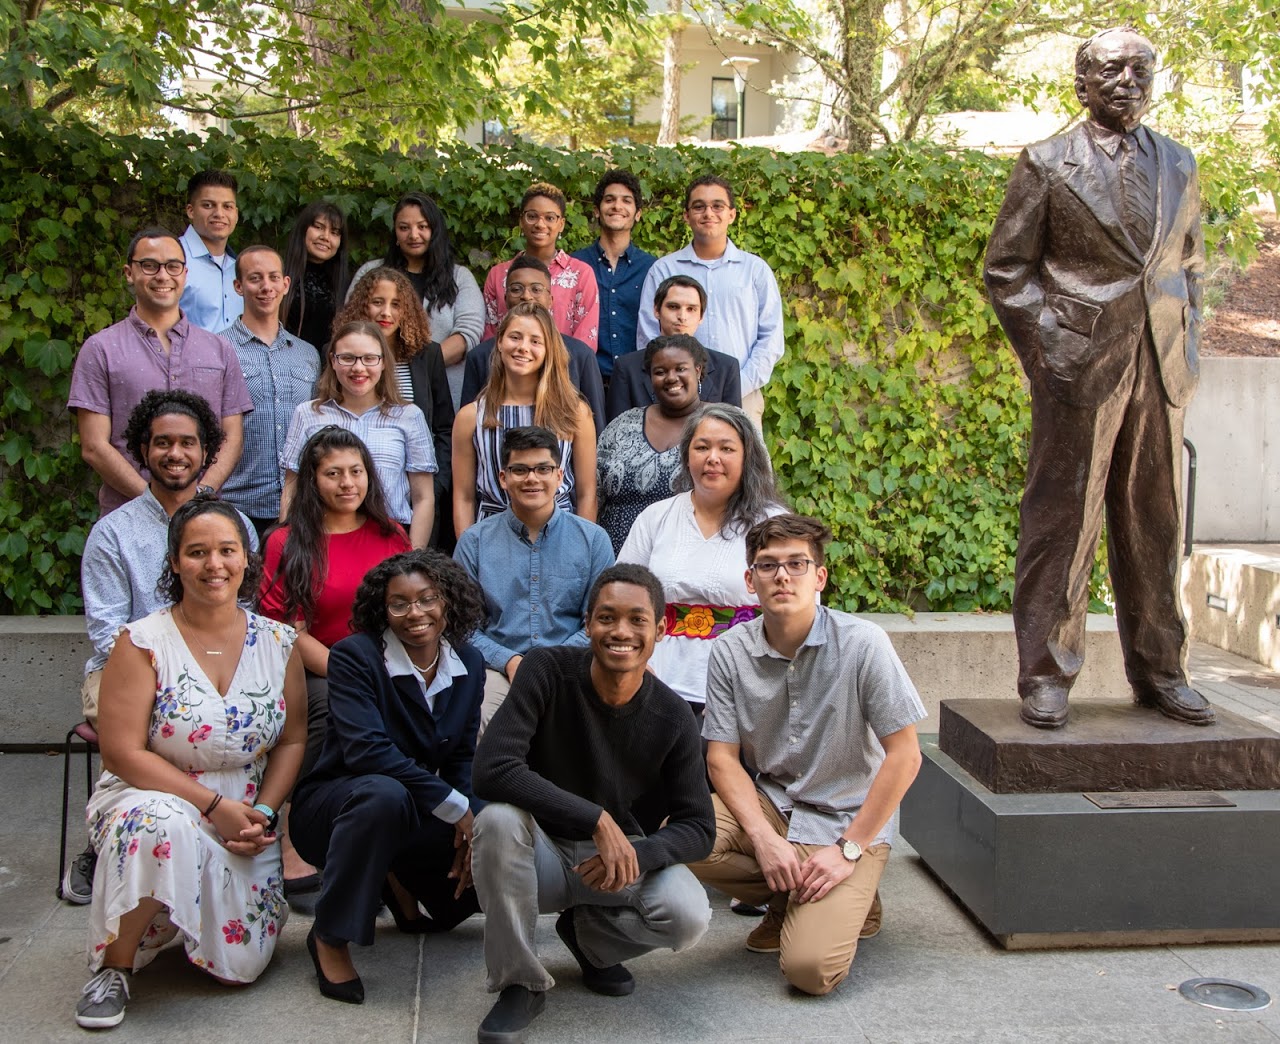 During the summer of 2019,
       I participated at the Mathematical Sciences Research Institute Undergraduate Program at Berkeley, California.